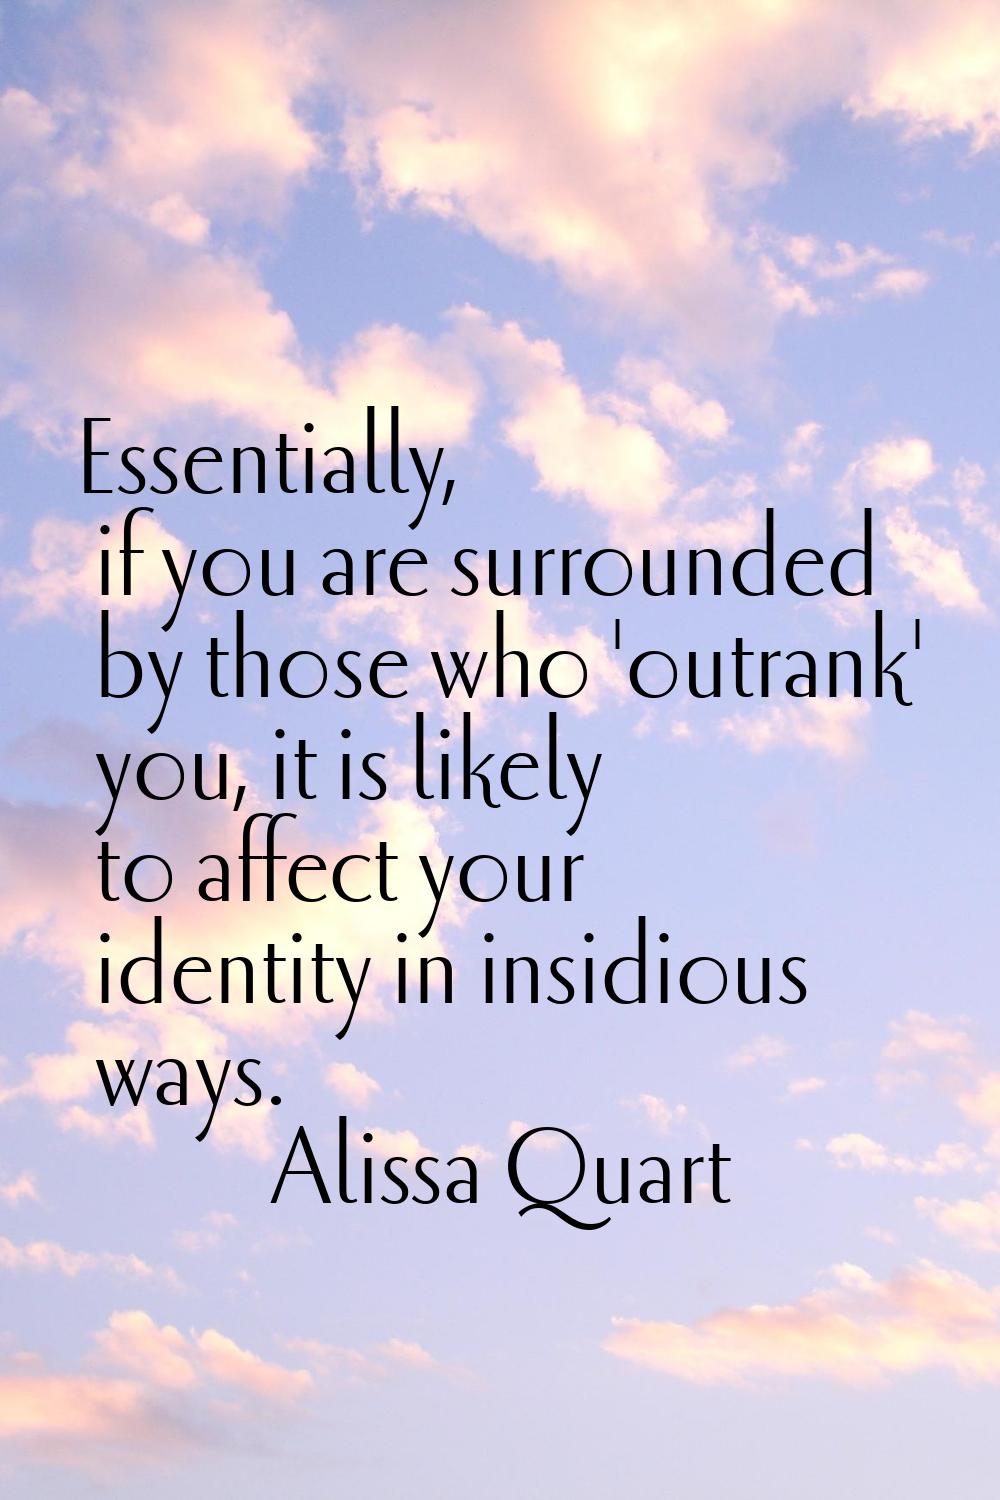 Essentially, if you are surrounded by those who 'outrank' you, it is likely to affect your identity